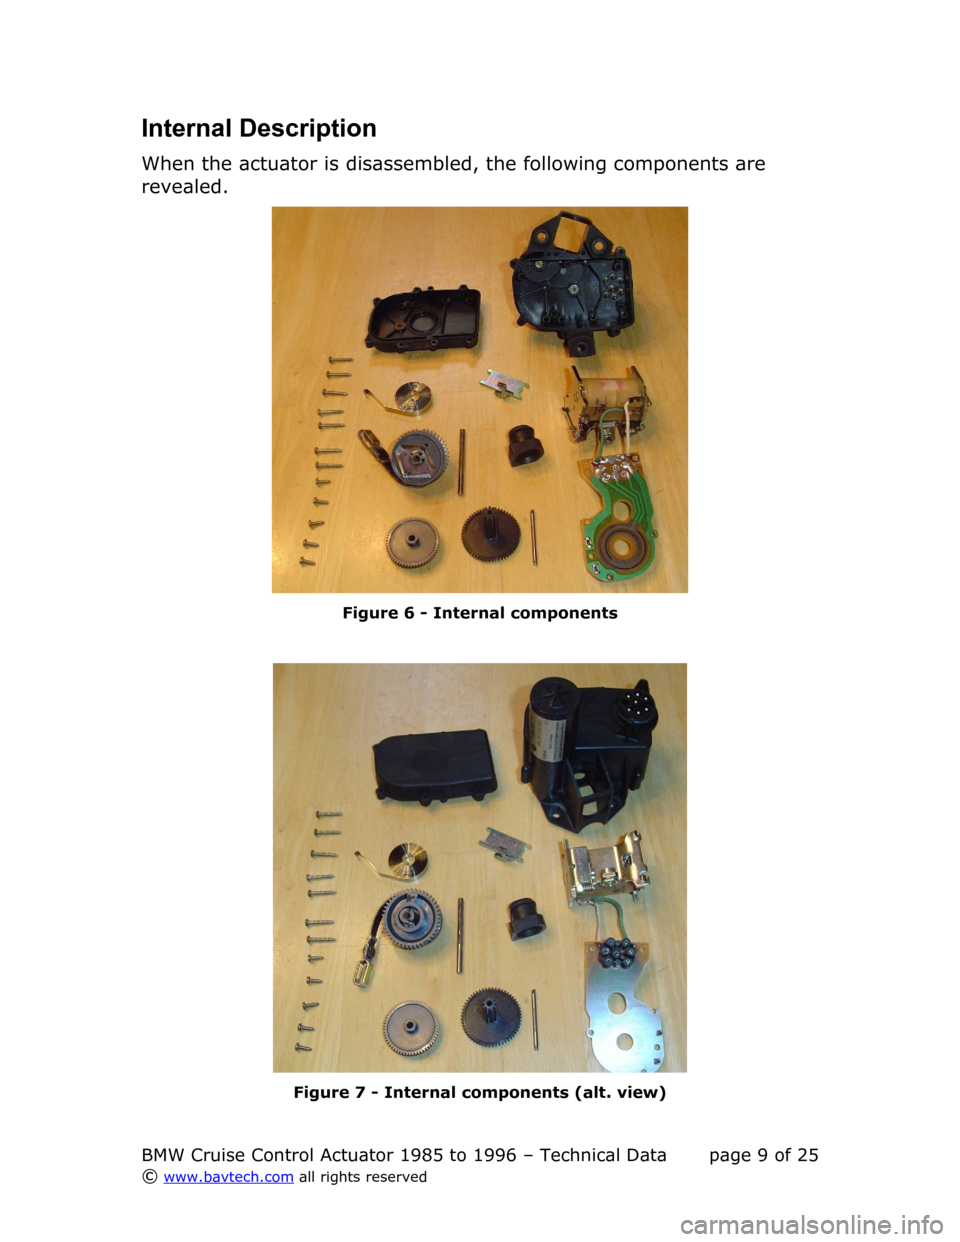 BMW 3 SERIES 1993 E36 Cruise Control Acutator Technical Data Workshop Manual Internal Description
When the actuator is disassembled, the following components are  
revealed.
Figure  6  - Internal components
Figure  7  - Internal components (alt. view)
BMW Cruise Control Actuat